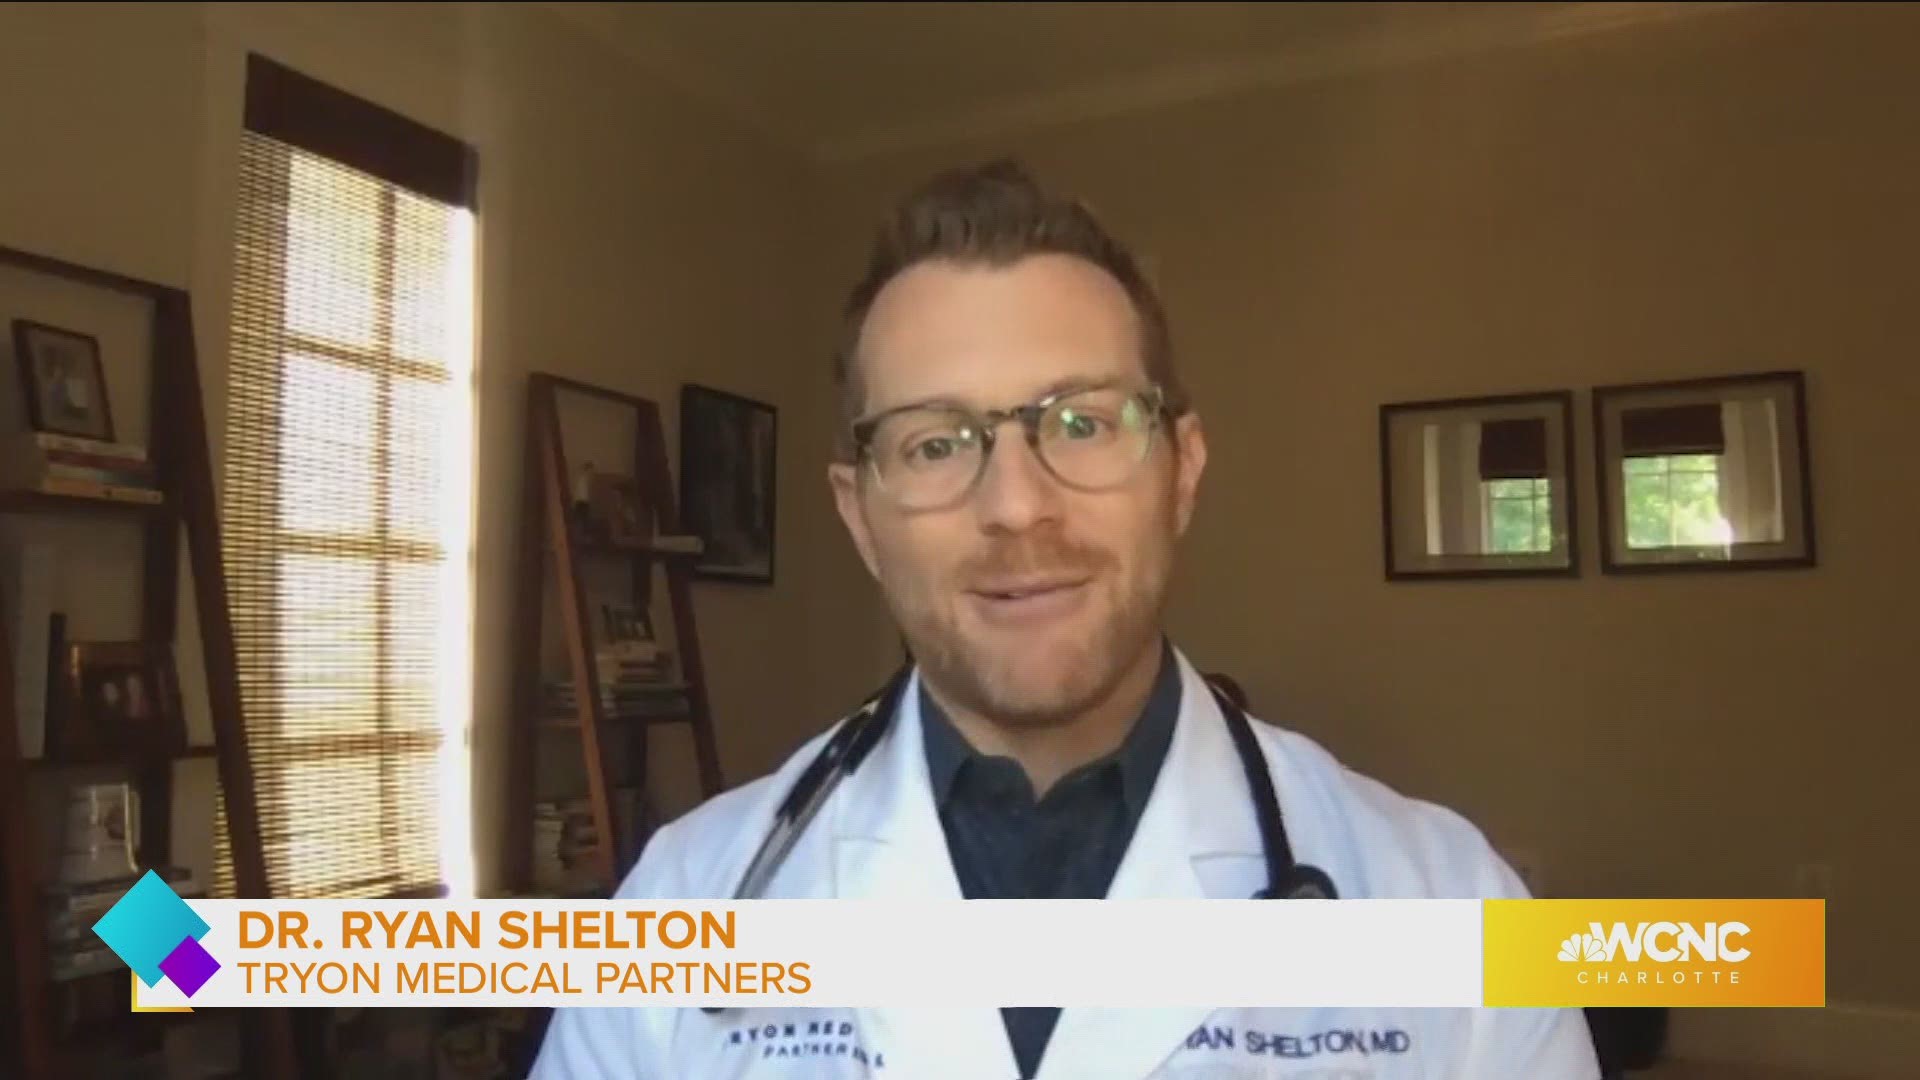 Dr. Ryan Shelton has tips to enjoy the pool during these unusual times